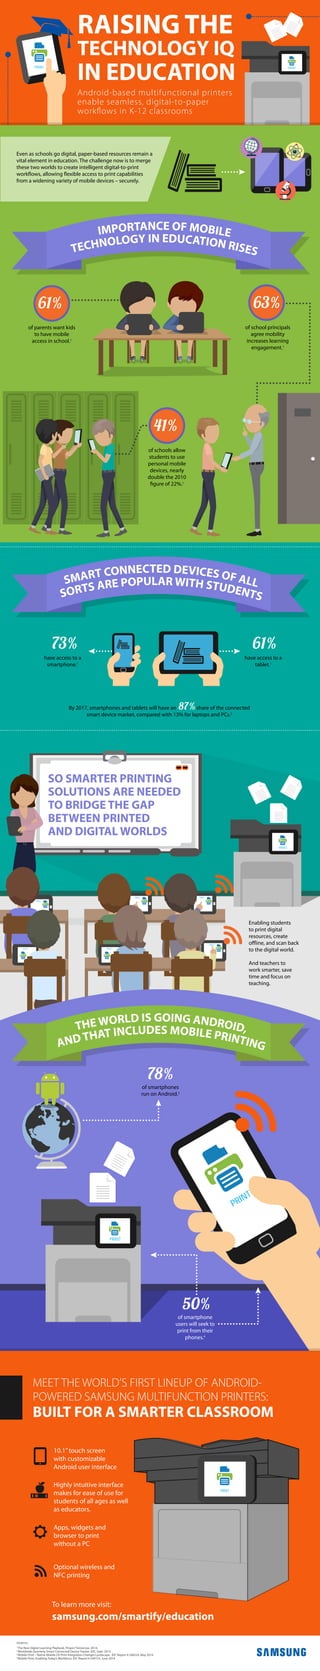 PRINT
PRINT PRINT
PRINT
PRINTPRINT
RAISING THE
TECHNOLOGY IQ
Android-based multifunctional printers
enable seamless, digital-to-paper
workflows in K-12 classrooms
IN EDUCATIONPRINT
Even as schools go digital, paper-based resources remain a
vital element in education. The challenge now is to merge
these two worlds to create intelligent digital-to-print
workflows, allowing flexible access to print capabilities
from a widening variety of mobile devices – securely.
TECHNOLOGY IN EDUCATION RISES
IMPORTANCE OF MOBILE
of parents want kids
to have mobile
access in school.1
of school principals
agree mobility
increases learning
engagement.1
61% 63%
of schools allow
students to use
personal mobile
devices, nearly
double the 2010
figure of 22%.1
41%
SORTS ARE POPULAR WITH STUDENTS
SMART CONNECTED DEVICES OF ALL
have access to a
smartphone.1
73%
have access to a
tablet.1
61%
By 2017, smartphones and tablets will have an 87%share of the connected
smart device market, compared with 13% for laptops and PCs.2
SO SMARTER PRINTING
SOLUTIONS ARE NEEDED
TO BRIDGE THE GAP
BETWEEN PRINTED
AND DIGITAL WORLDS
Enabling students
to print digital
resources, create
offline, and scan back
to the digital world.
And teachers to
work smarter, save
time and focus on
teaching.
AND THAT INCLUDES MOBILE PRINTING
THE WORLD IS GOING ANDROID,
of smartphones
run on Android.3
78%
PRINT
of smartphone
users will seek to
print from their
phones.4
50%
SOURCES:
1
The New Digital Learning Playbook. Project Tomorrow. 2014.
2
Worldwide Quarterly Smart Connected Device Tracker. IDC. Sept. 2013
3
Mobile Print – Native Mobile OS Print Integration Changes Landscape. IDC Report # 248524. May 2014
4
Mobile Print: Enabling Today’s Workforce. IDC Report # 249153. June 2014
MEET THE WORLD’S FIRST LINEUP OF ANDROID-
POWERED SAMSUNG MULTIFUNCTION PRINTERS:
BUILT FOR A SMARTER CLASSROOM
10.1”touch screen
with customizable
Android user interface
Apps, widgets and
browser to print
without a PC
Optional wireless and
NFC printing
PRINT
PRINTPRINT
PRINT
PRINT
Highly intuitive interface
makes for ease of use for
students of all ages as well
as educators.
To learn more visit:
samsung.com/smartify/education
 